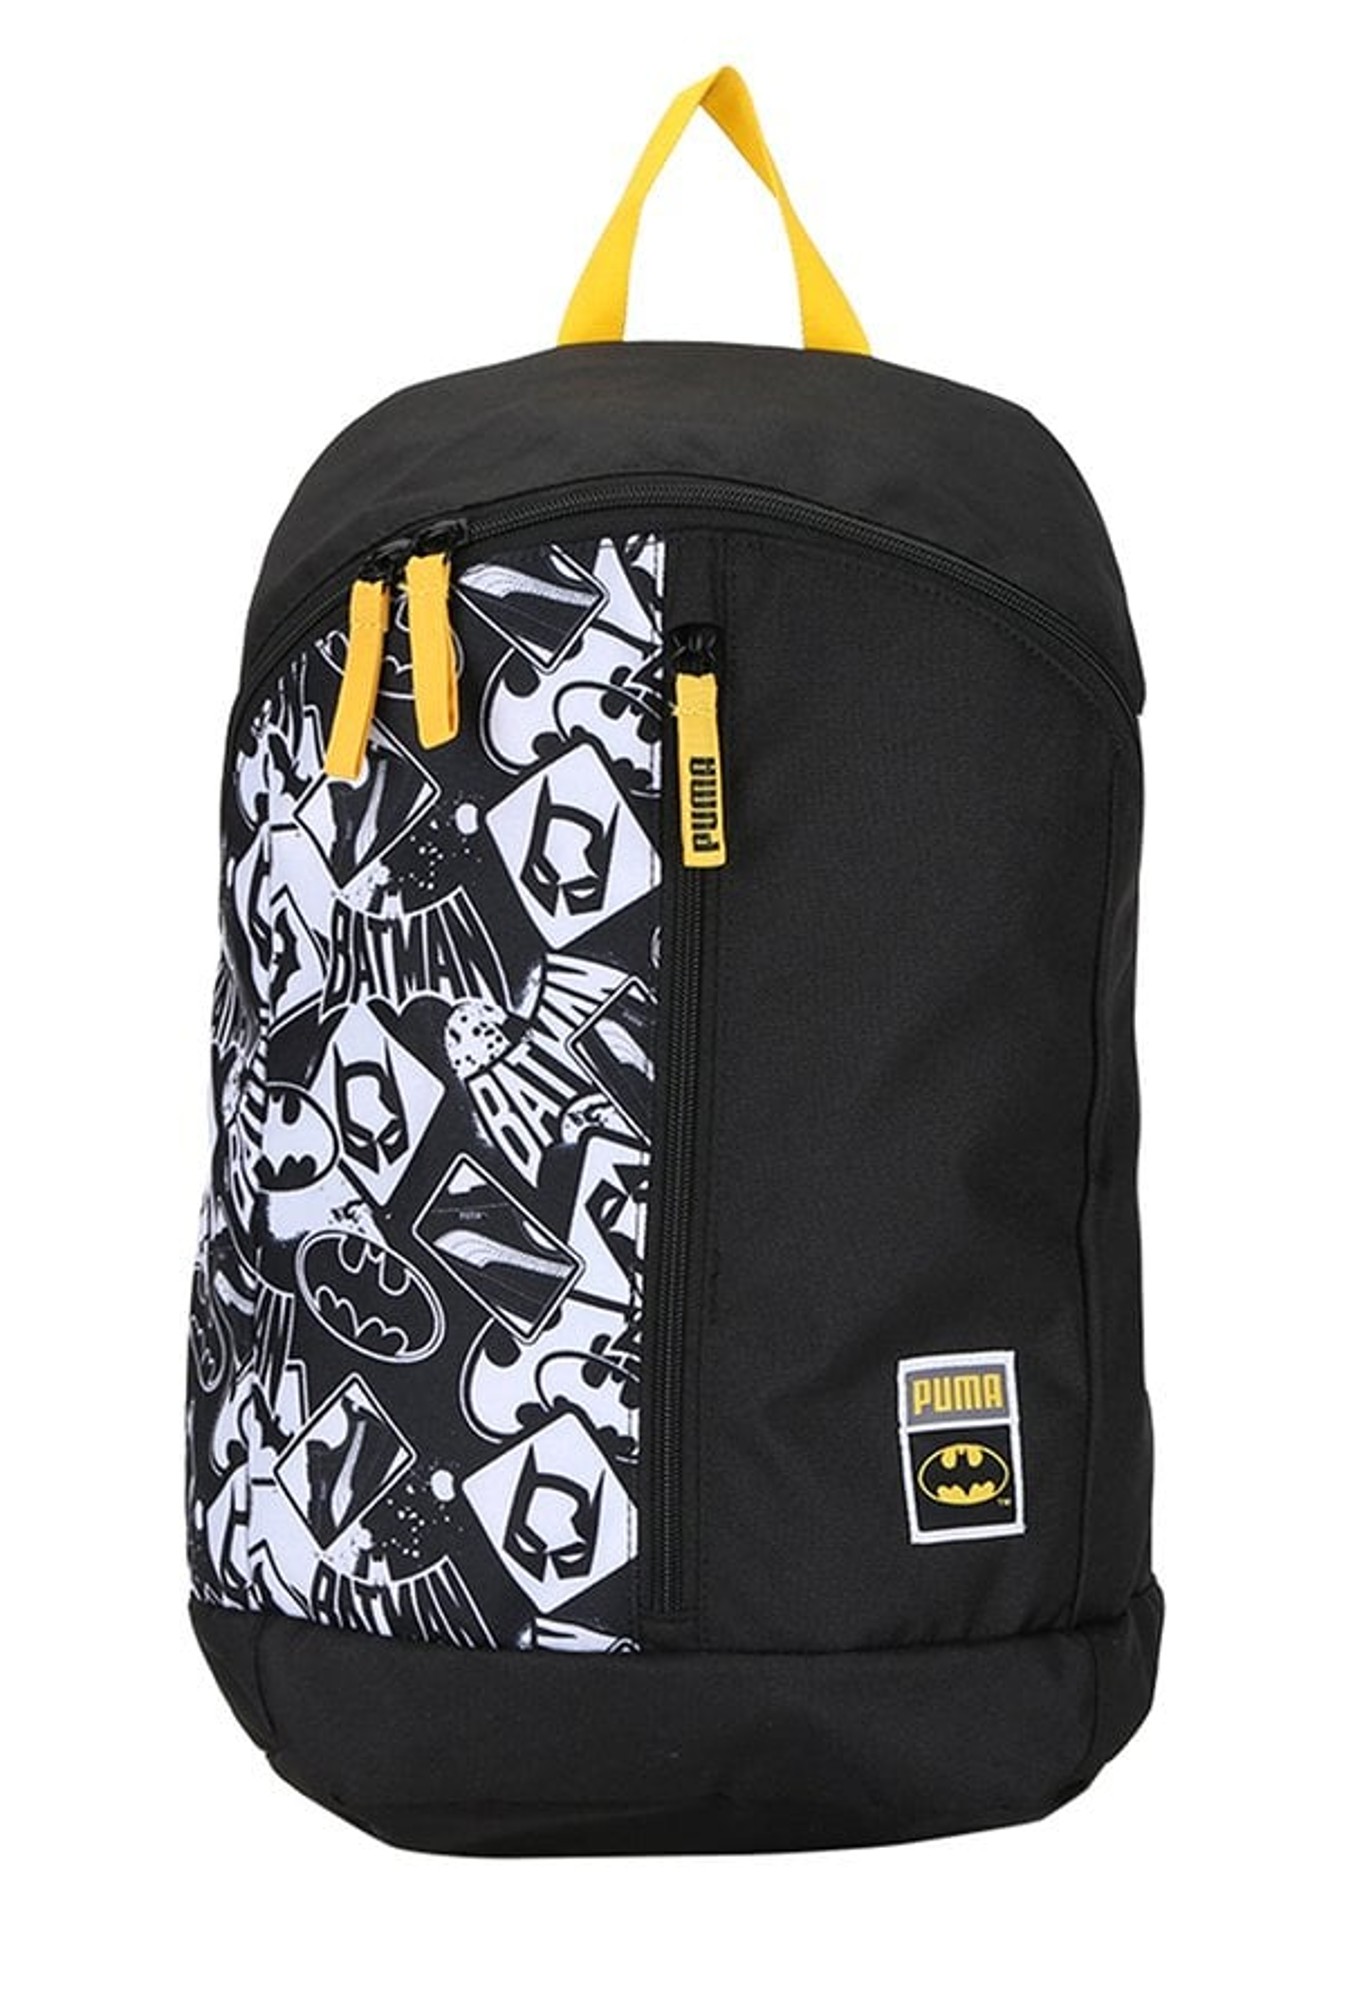 Backpack Online At Best Price @ Tata CLiQ